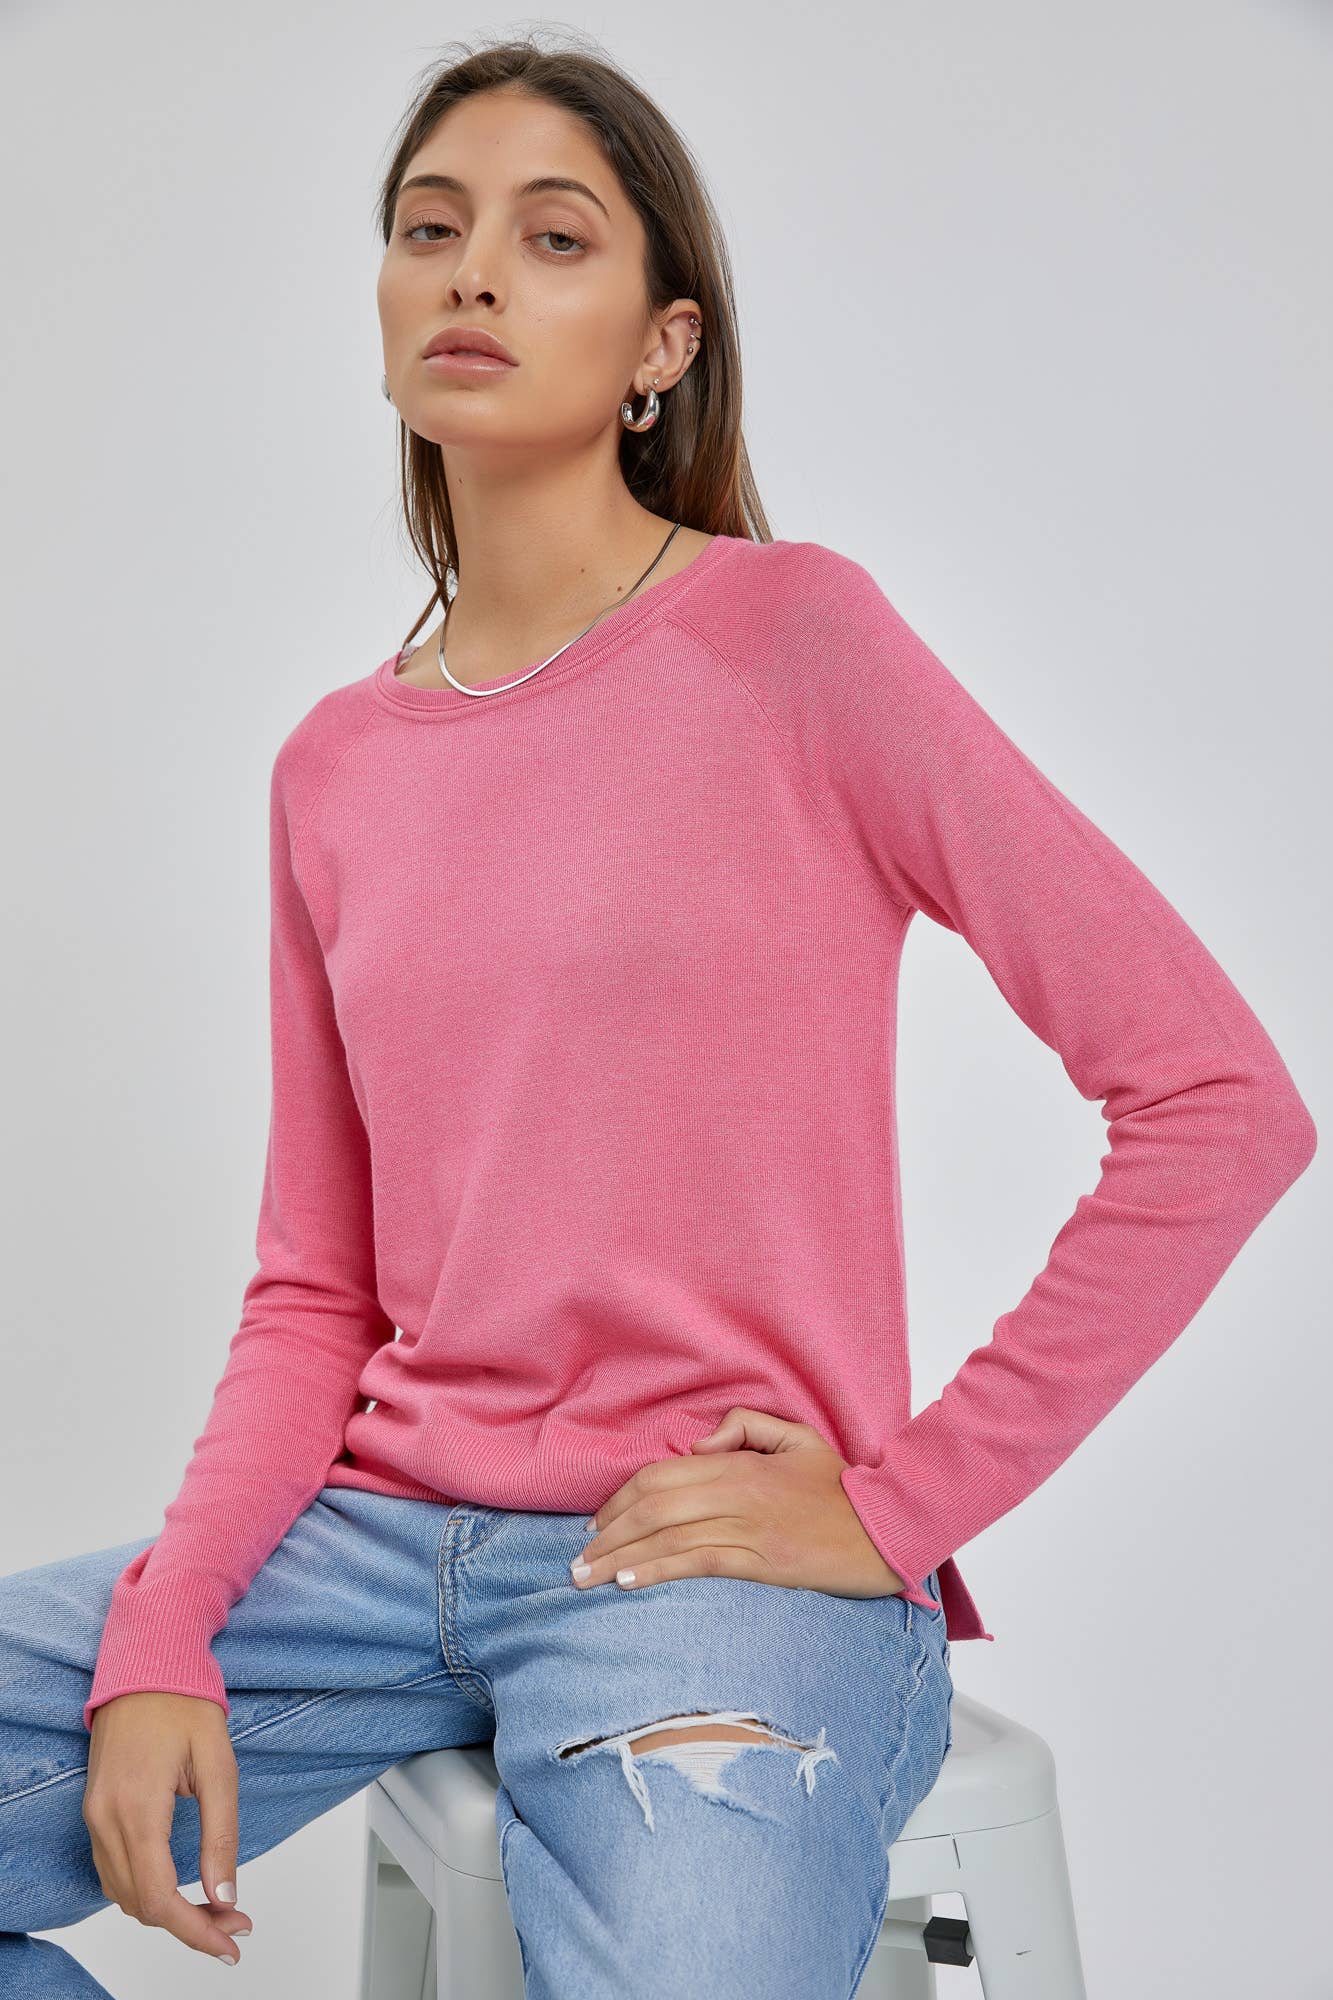 The Camille Sweater: Large / Plum